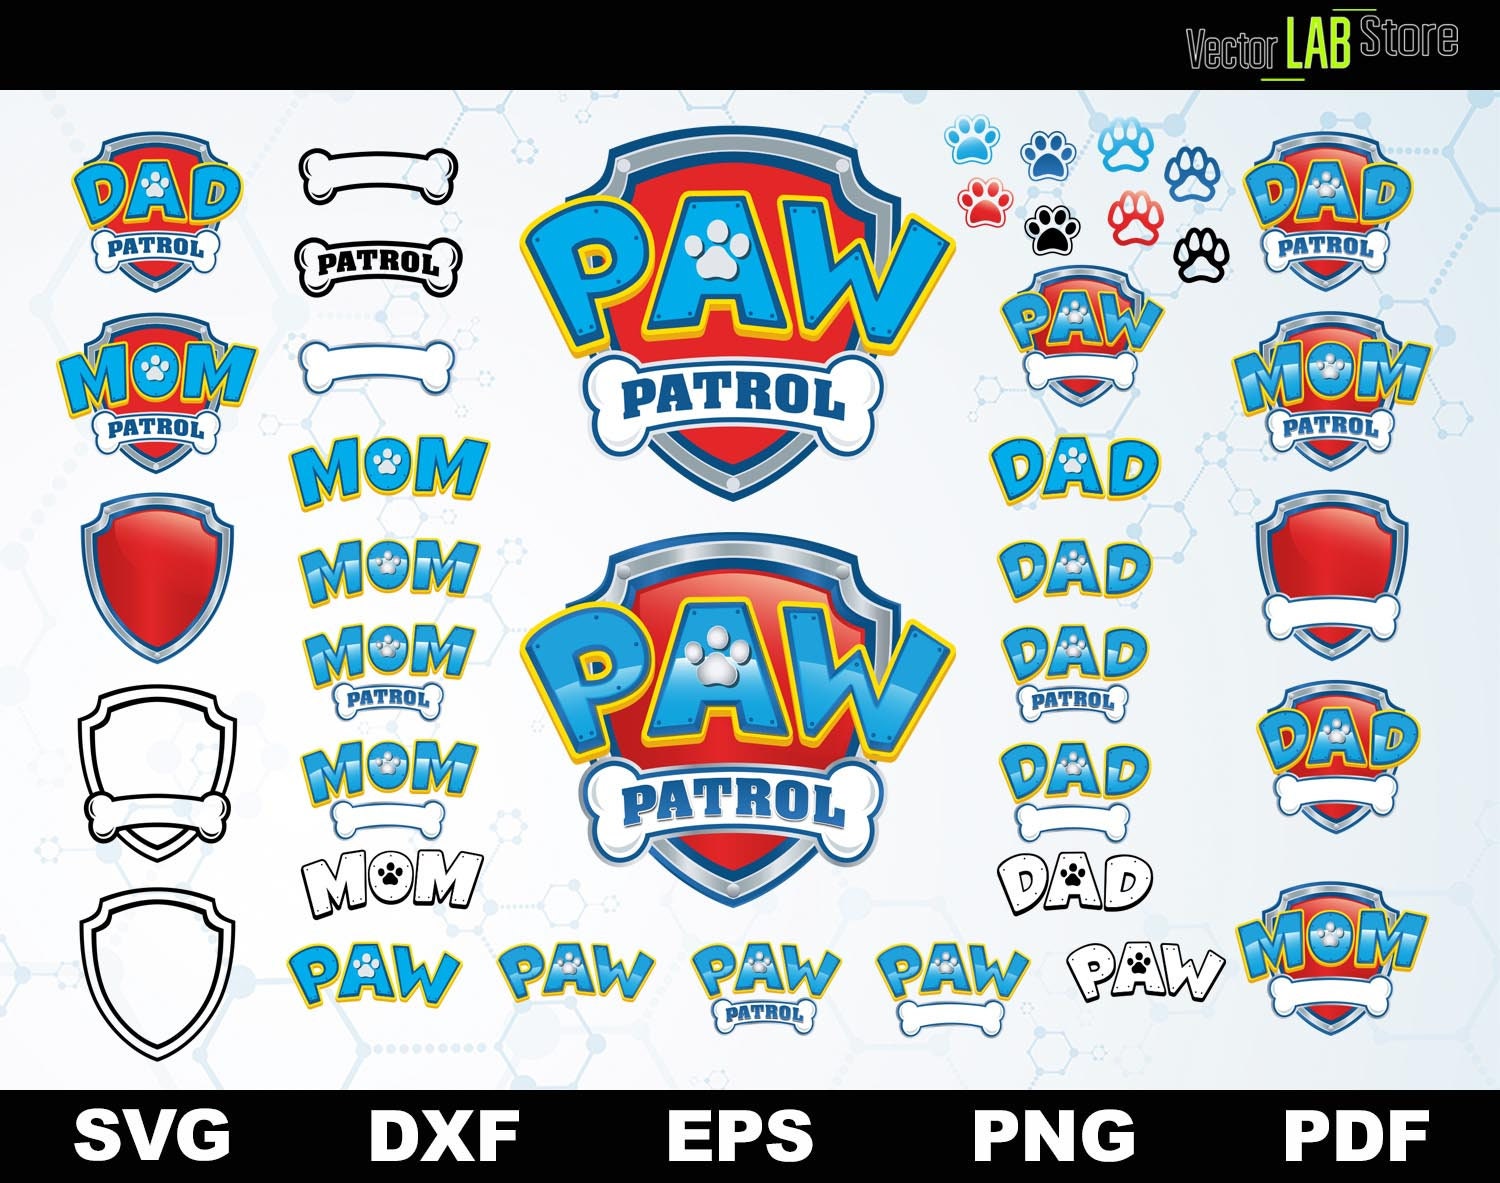 Download Paw Patrol Vector Cutting Files and Clipart Svg Dxf Eps Png